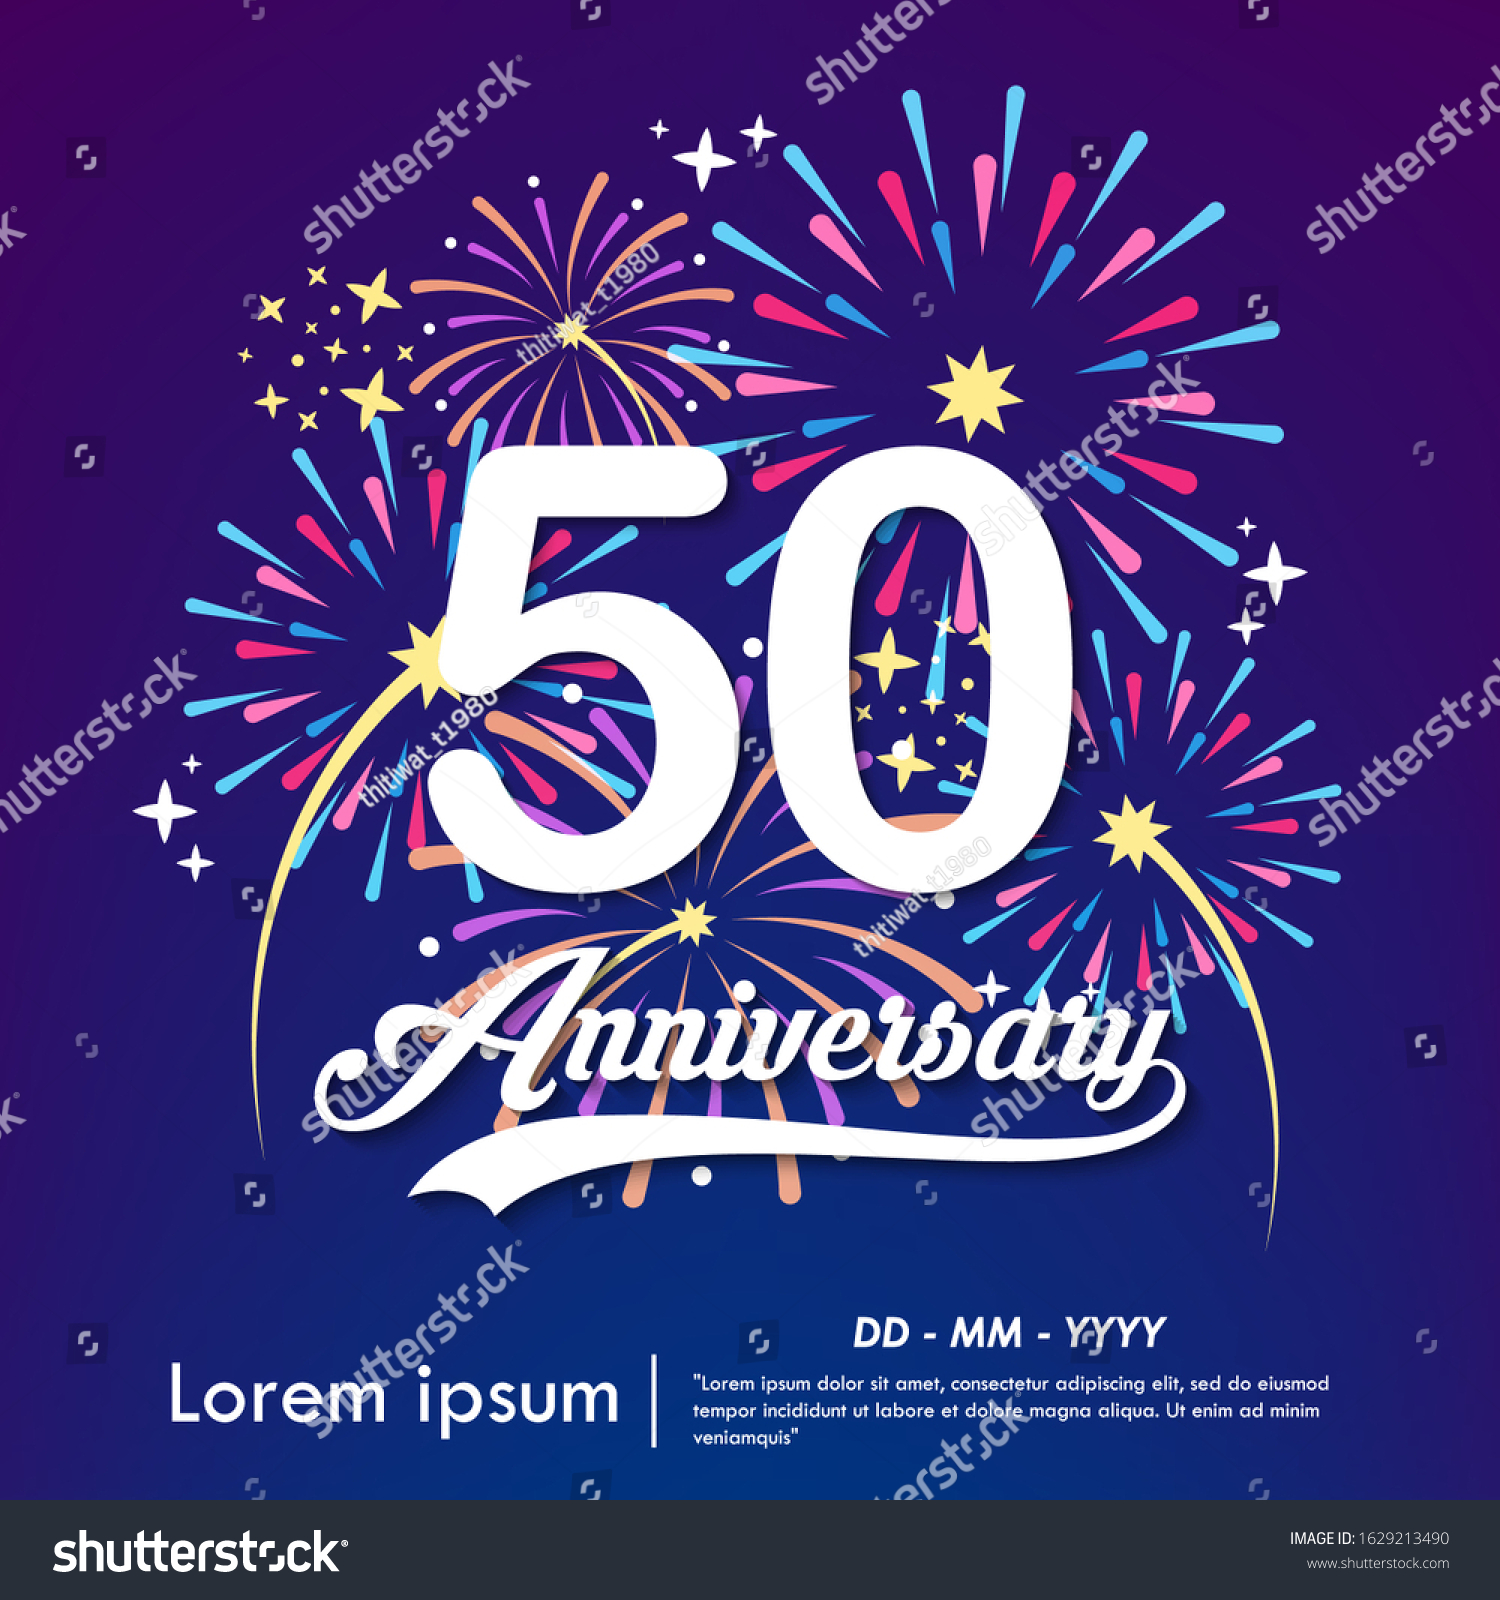 SVG of 50th years anniversary celebration emblem. white anniversary logo isolated with colorful fireworks background. vector illustration template design for web, flyers, poster, greeting & invitation card svg